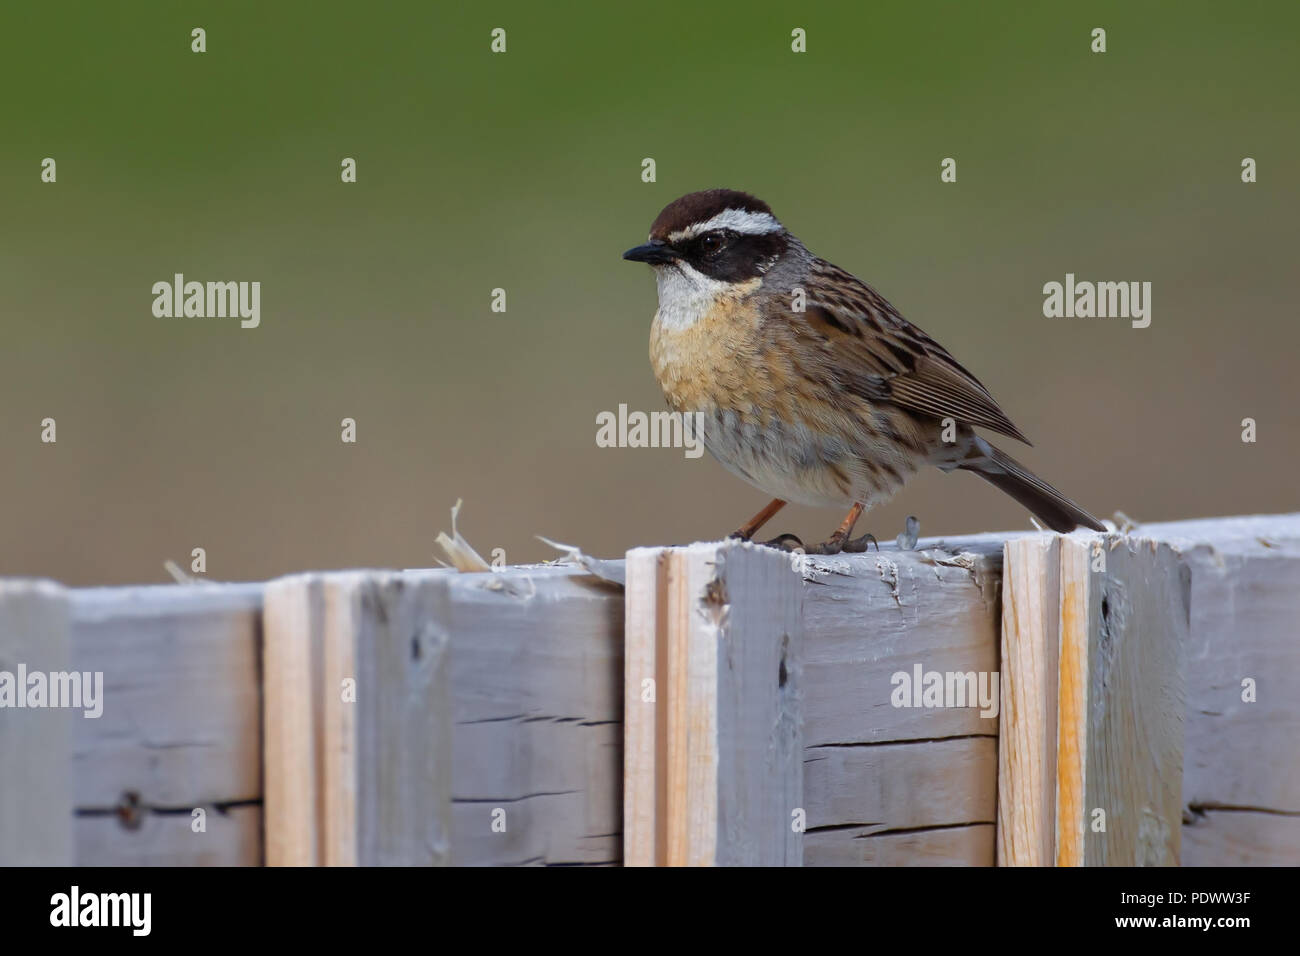 Adult Radde's Accentor on fence Stock Photo